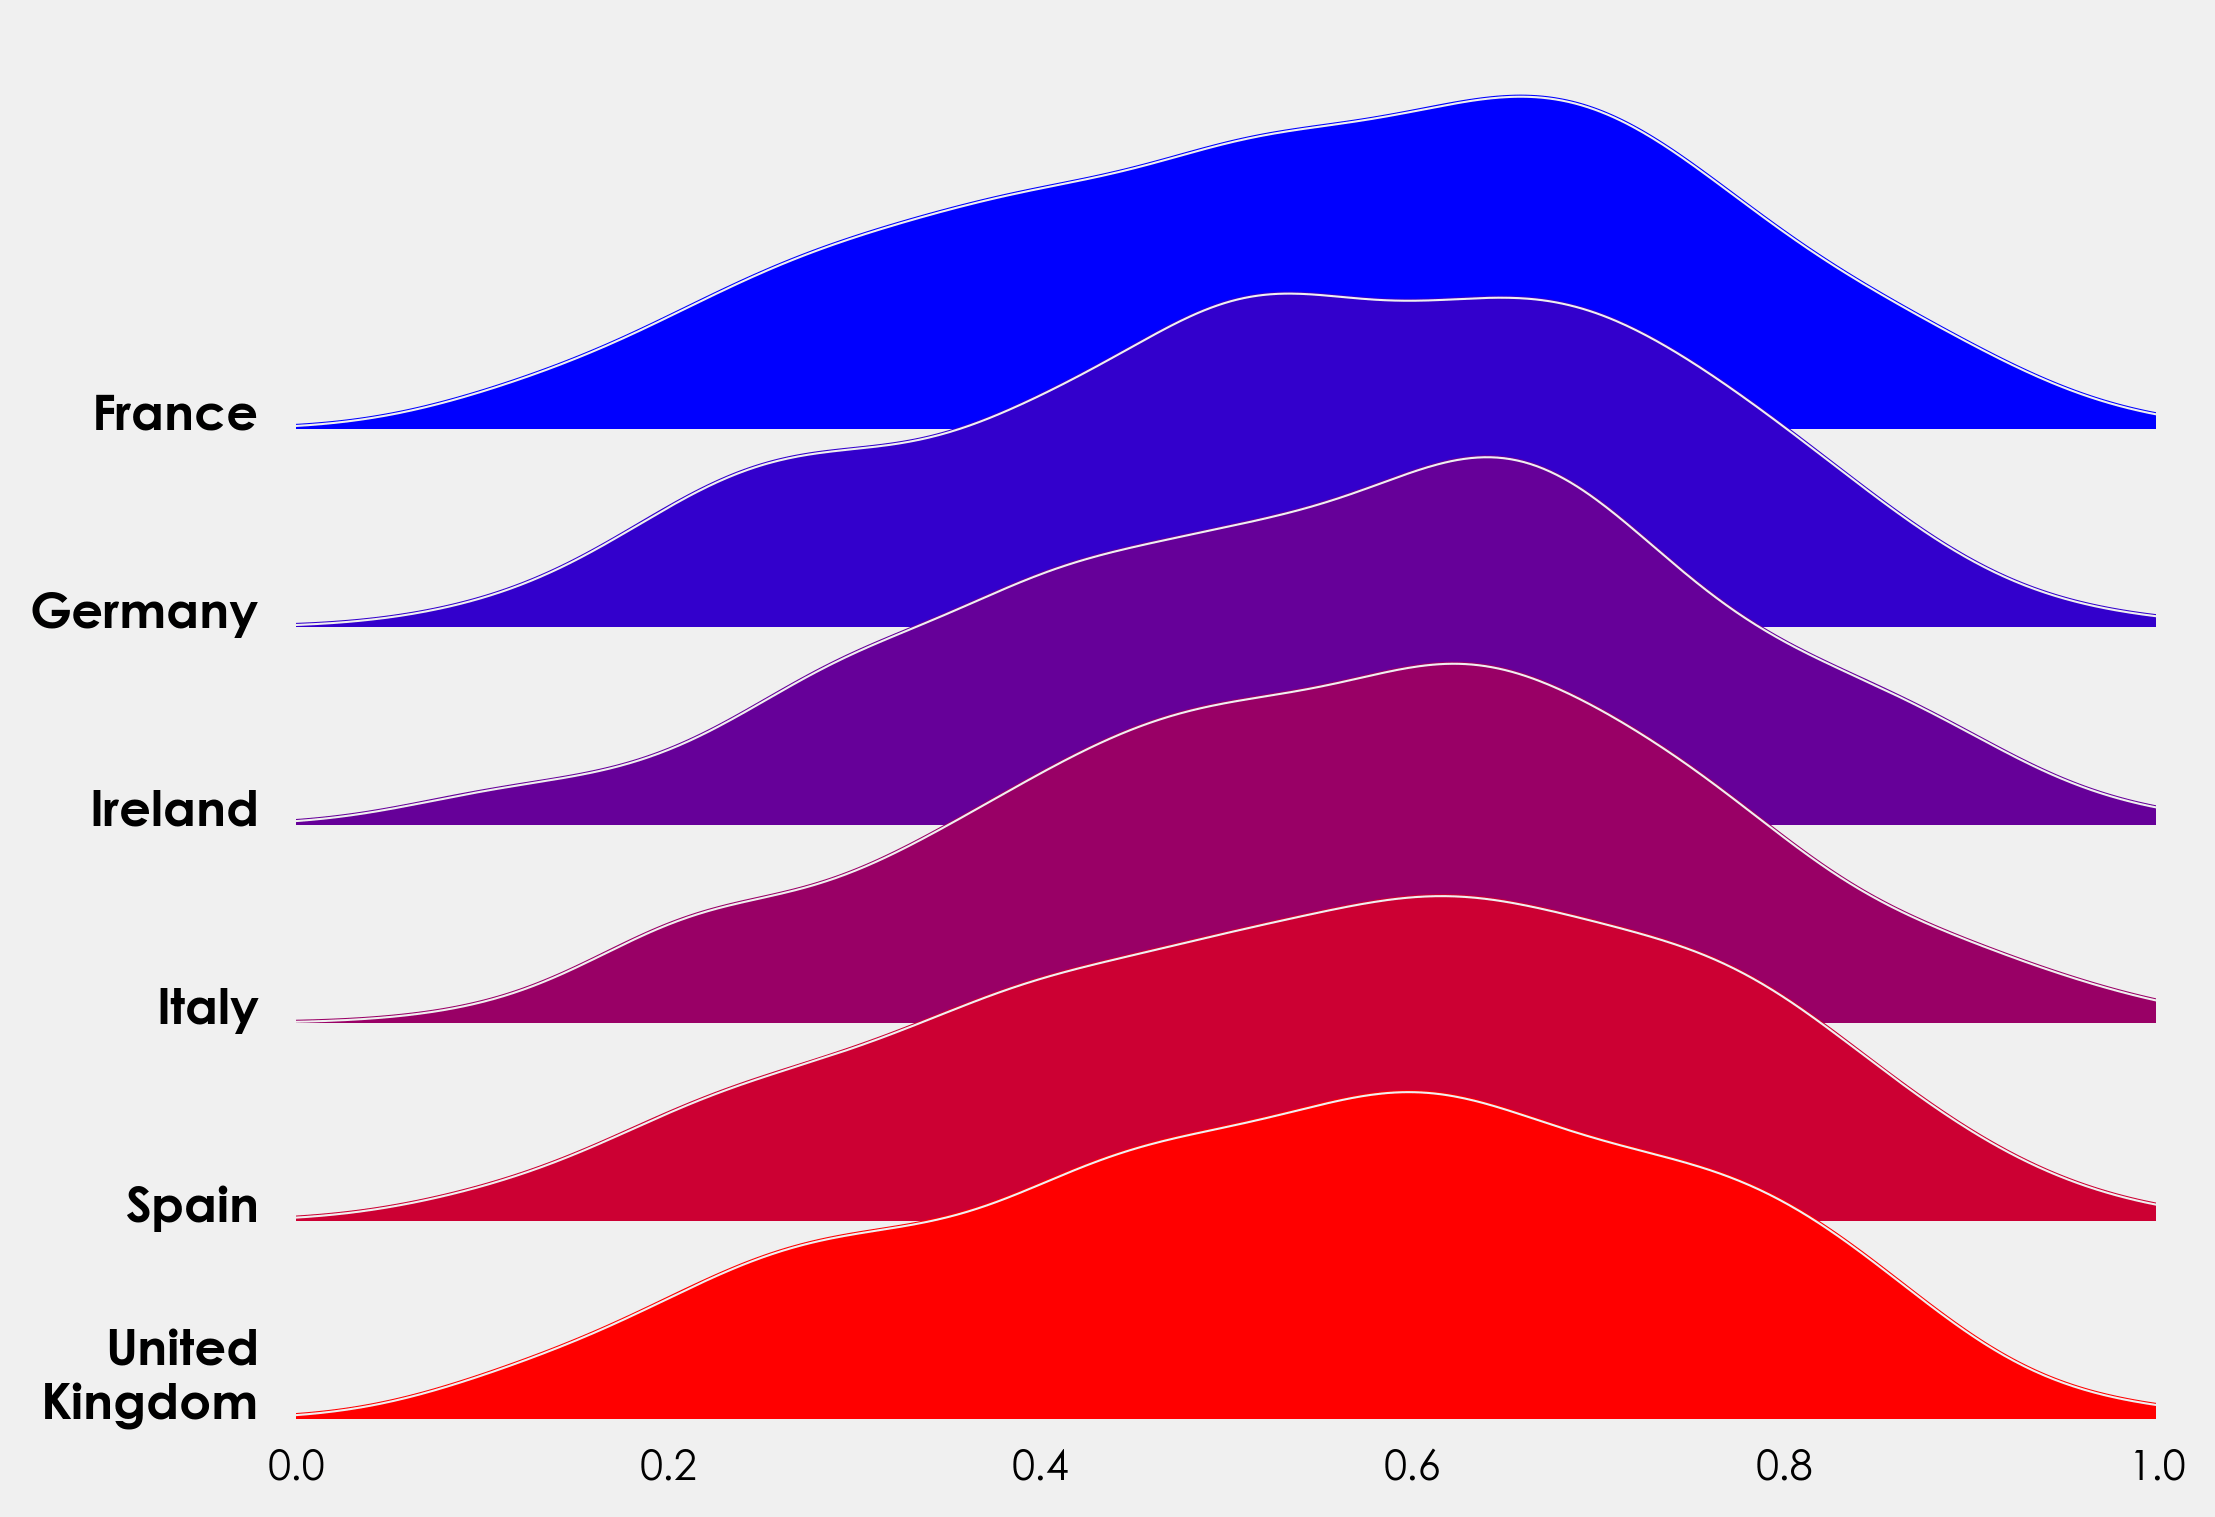 6 kernel density estimate (KDE) charts each representing 6 countries. France is blue, Germany is dark blue, Ireland is purple, Italy is a lighter shade of purple, Spain is red, and the United Kingdom is blood red.  The x-axis shows the distribution of children in each county listed.